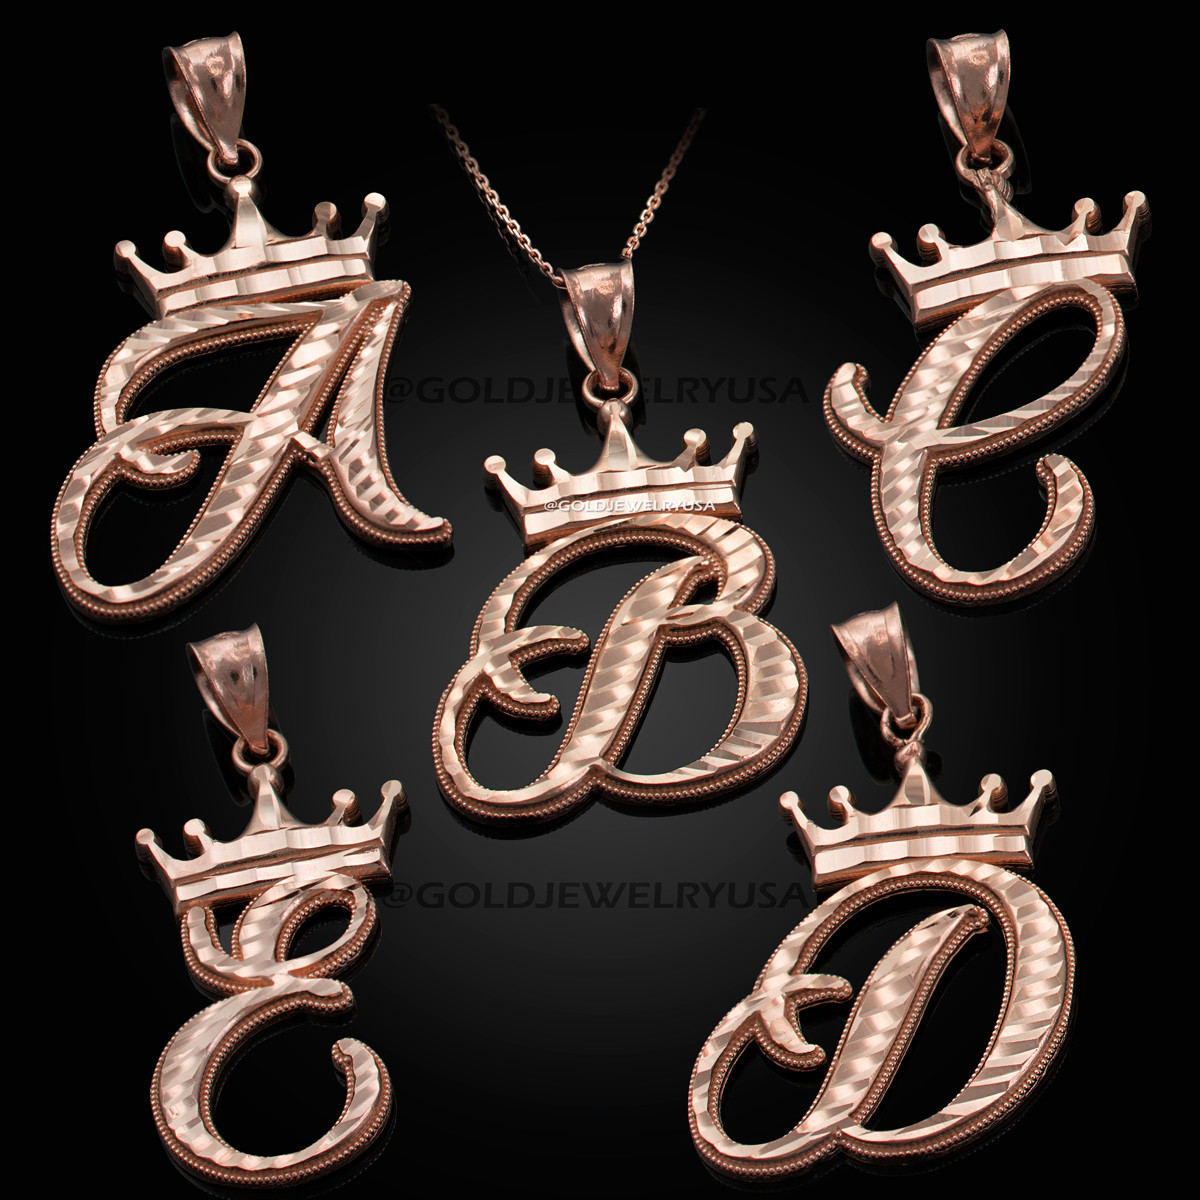 Rose Gold Nugget Initial Letter S Pendant Necklace